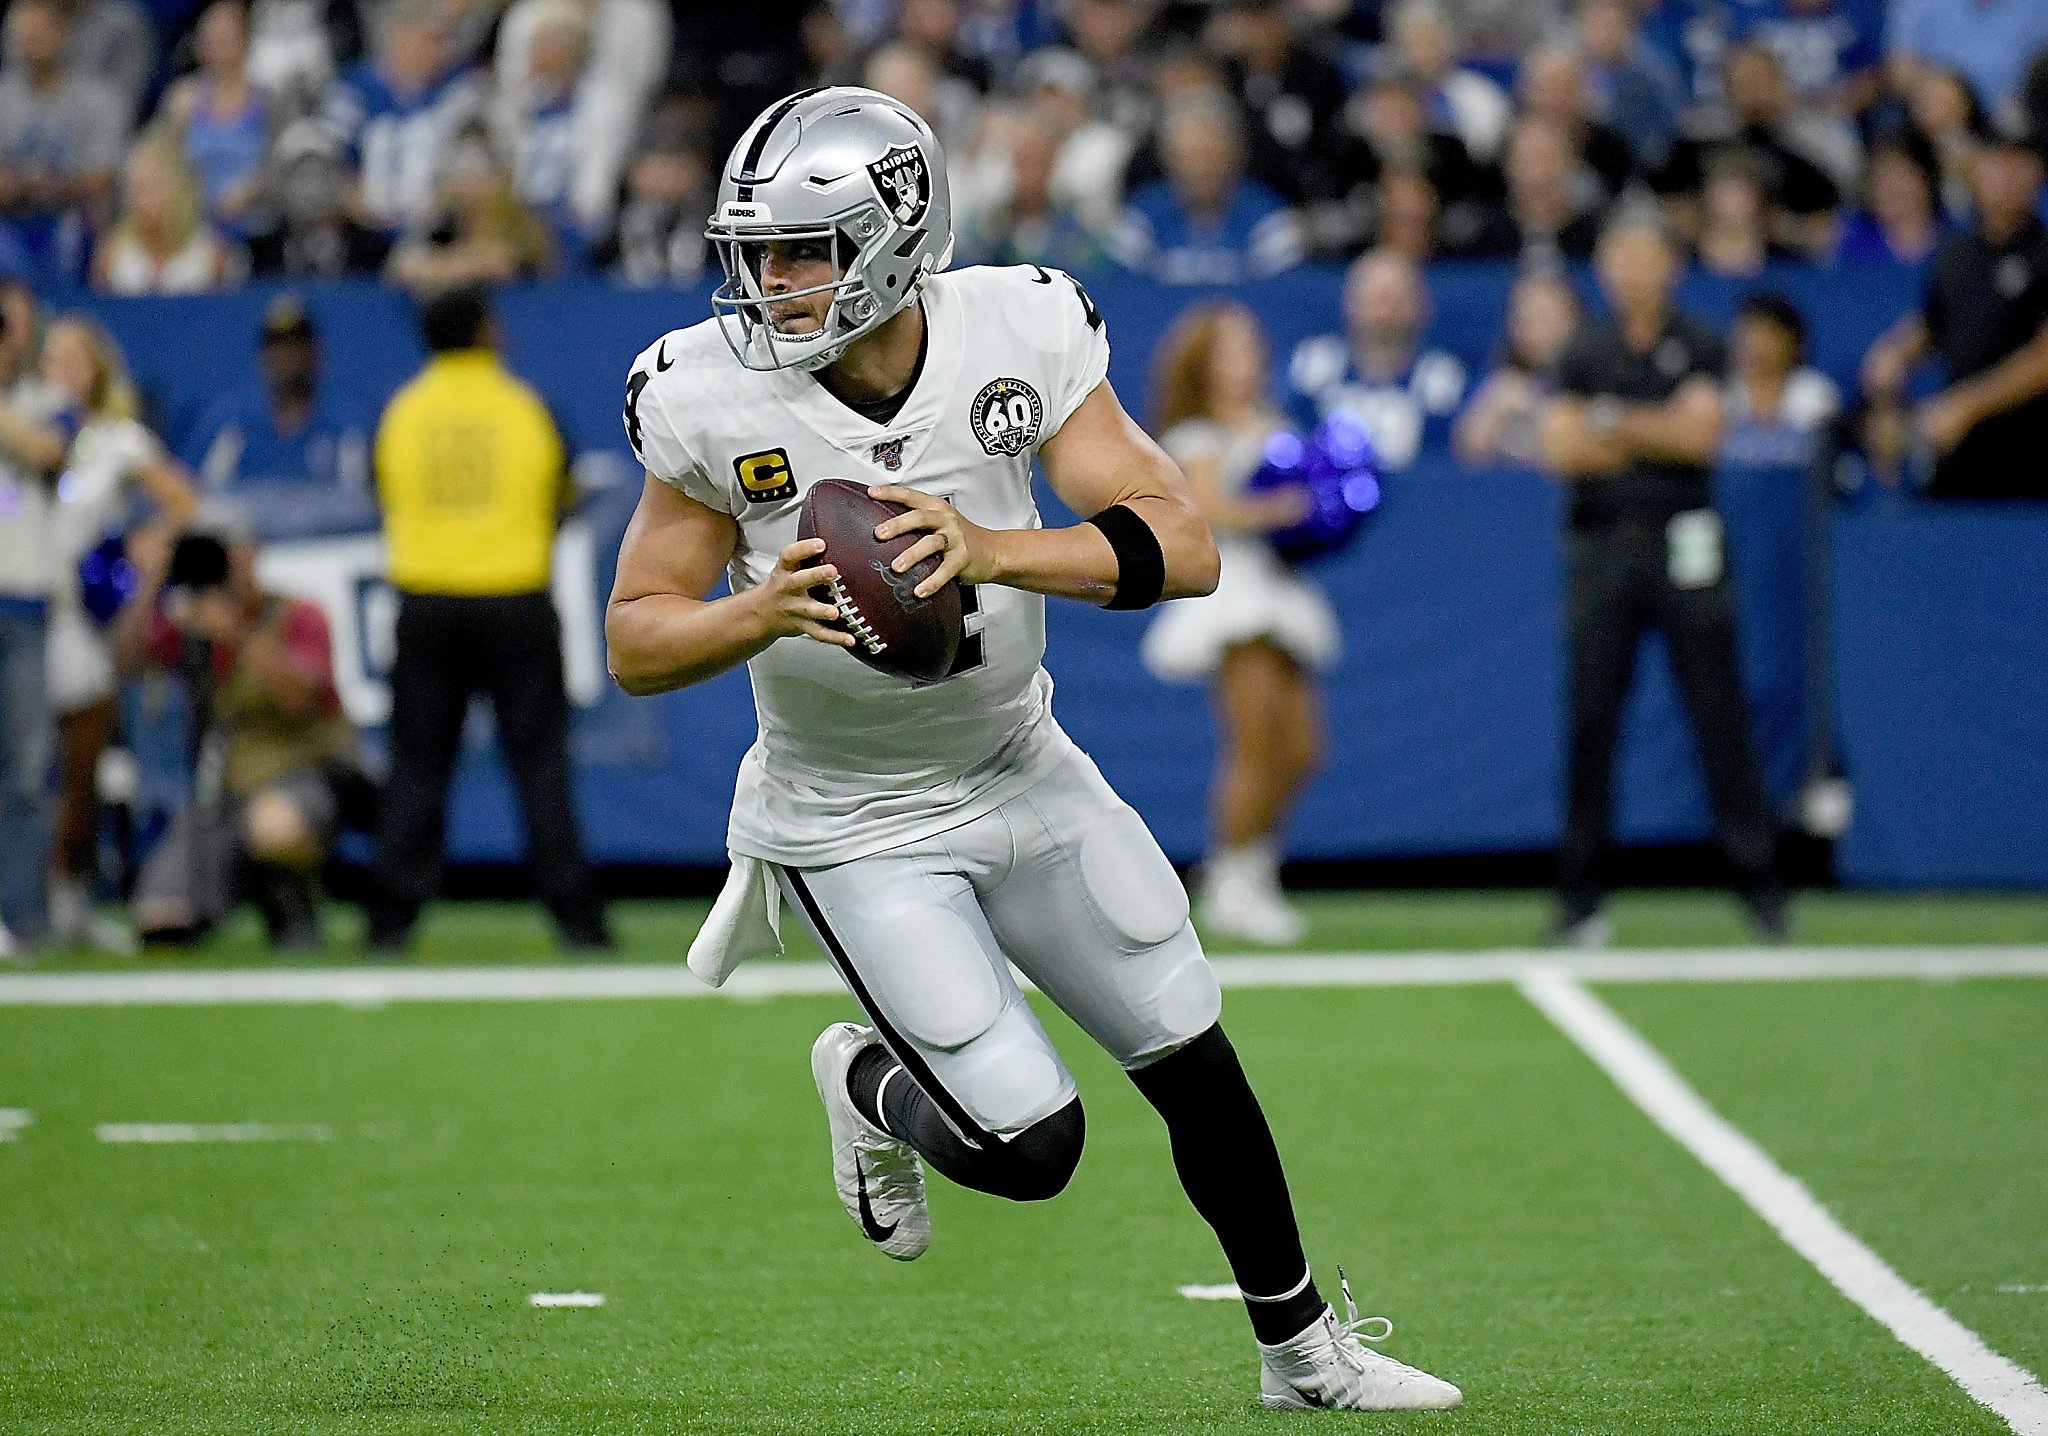 Raiders game grades vs. Colts: an impressive start to a complete effort